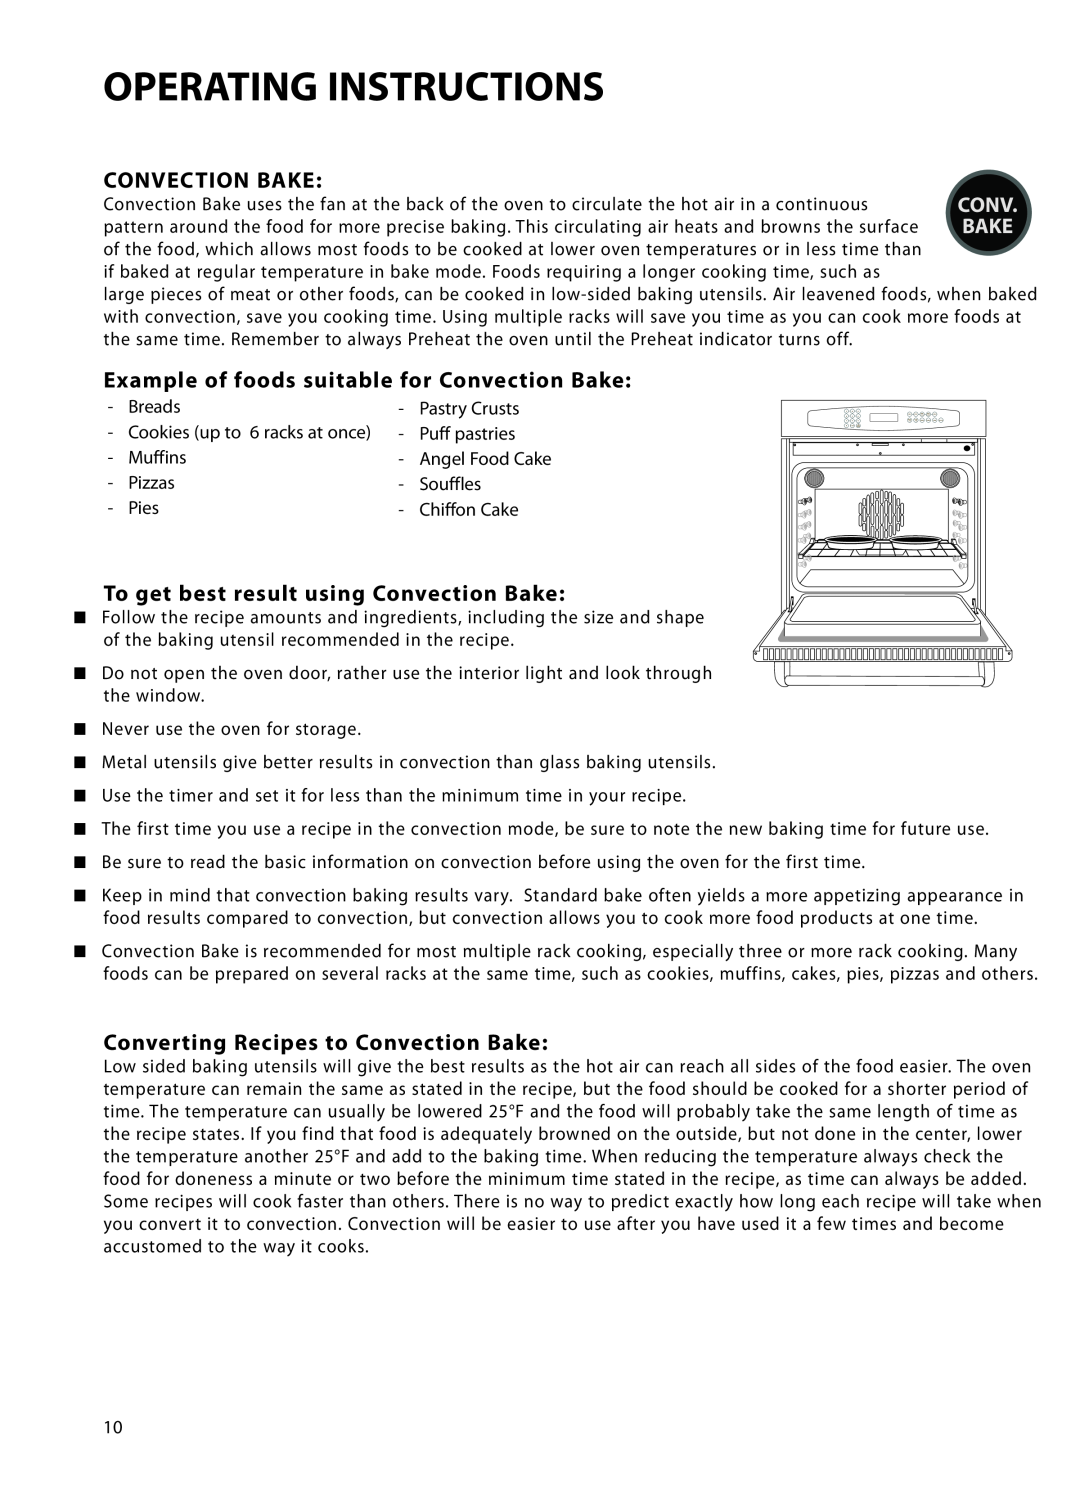 DCS WOT-230, WOTD-230, WOTD-227 Example of foods suitable for Convection Bake, To get best result using Convection Bake 